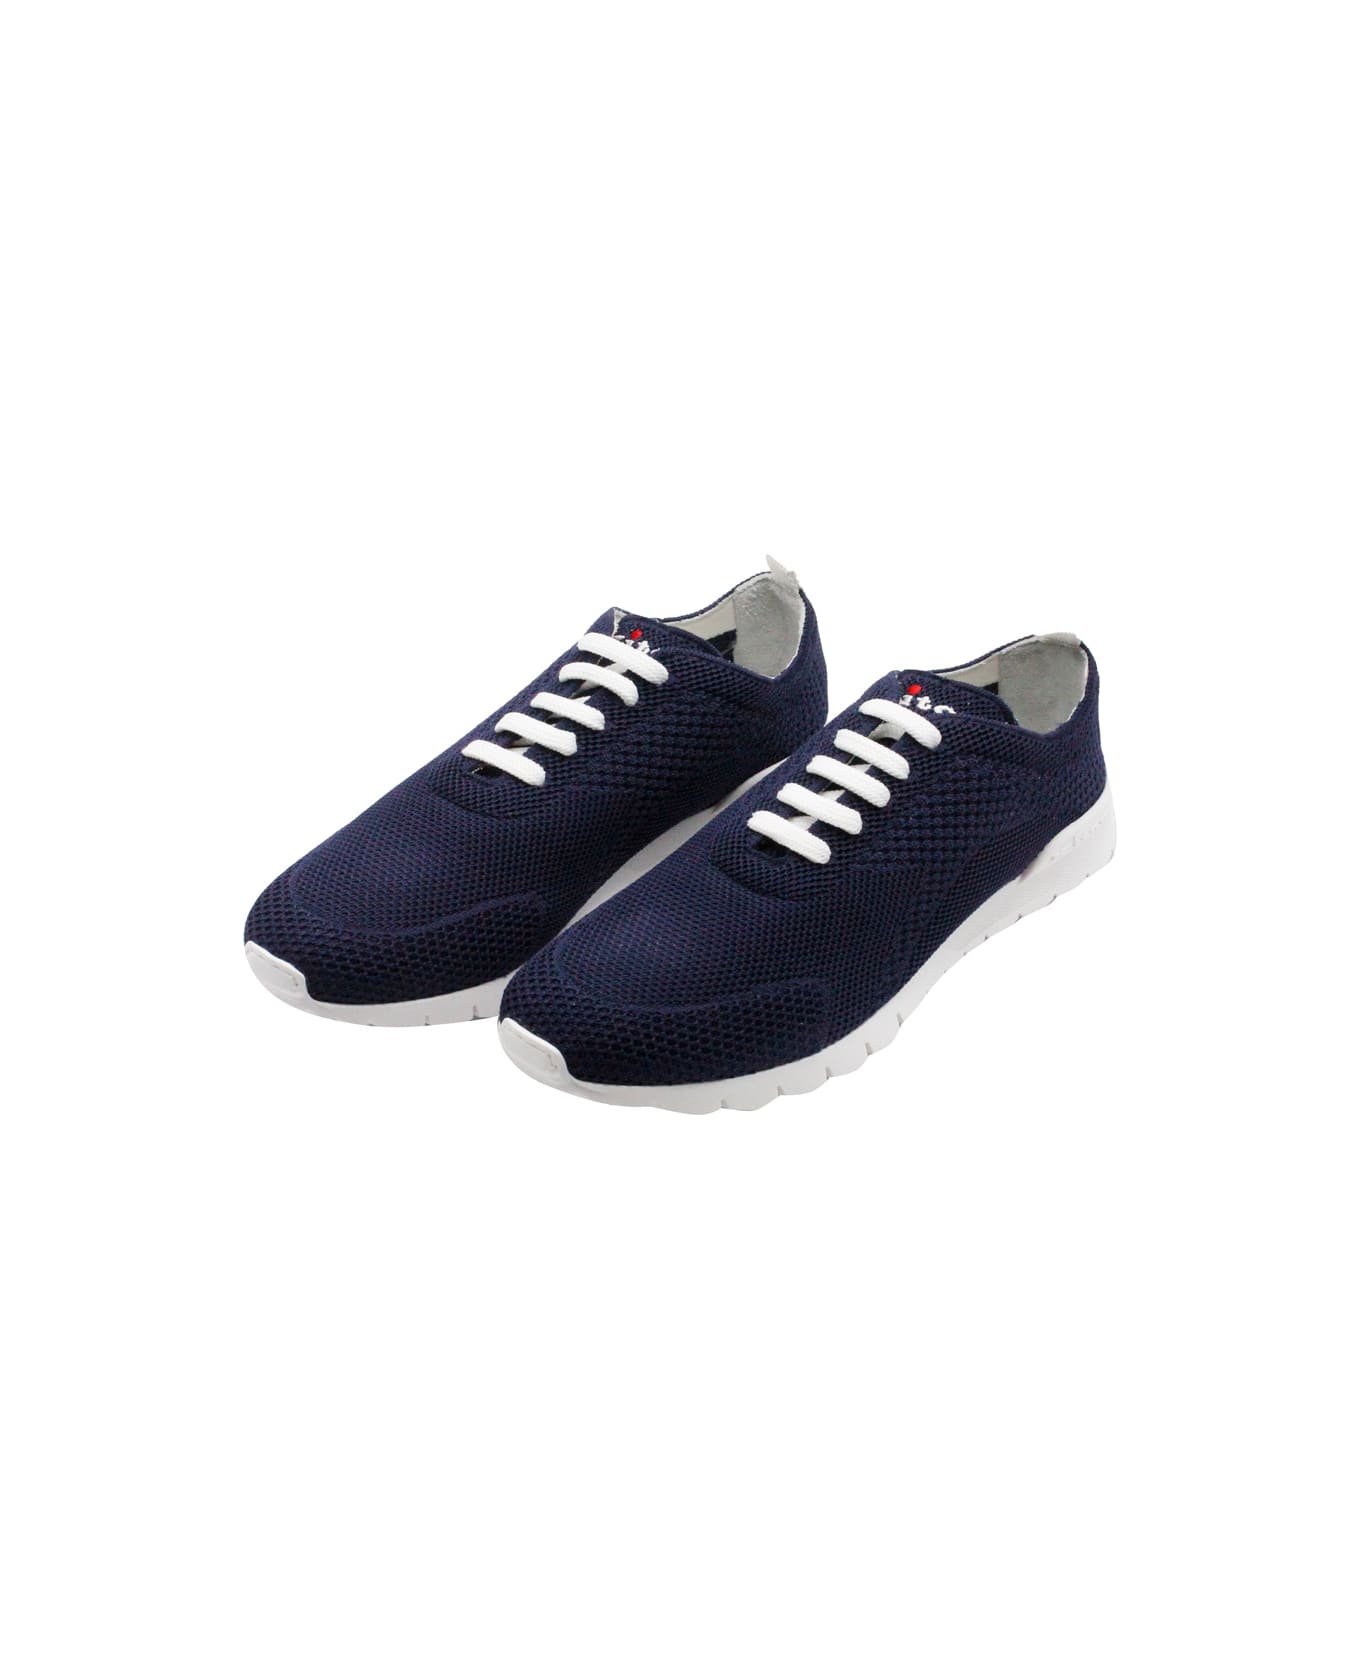 Kiton Sneaker Shoe Made Of Knit Fabric. The Bottom, With A White Sole, Is Flexible And Extra Light; The Elastic Tongue Ensures Greater Comfort. Logo - Blu スニーカー